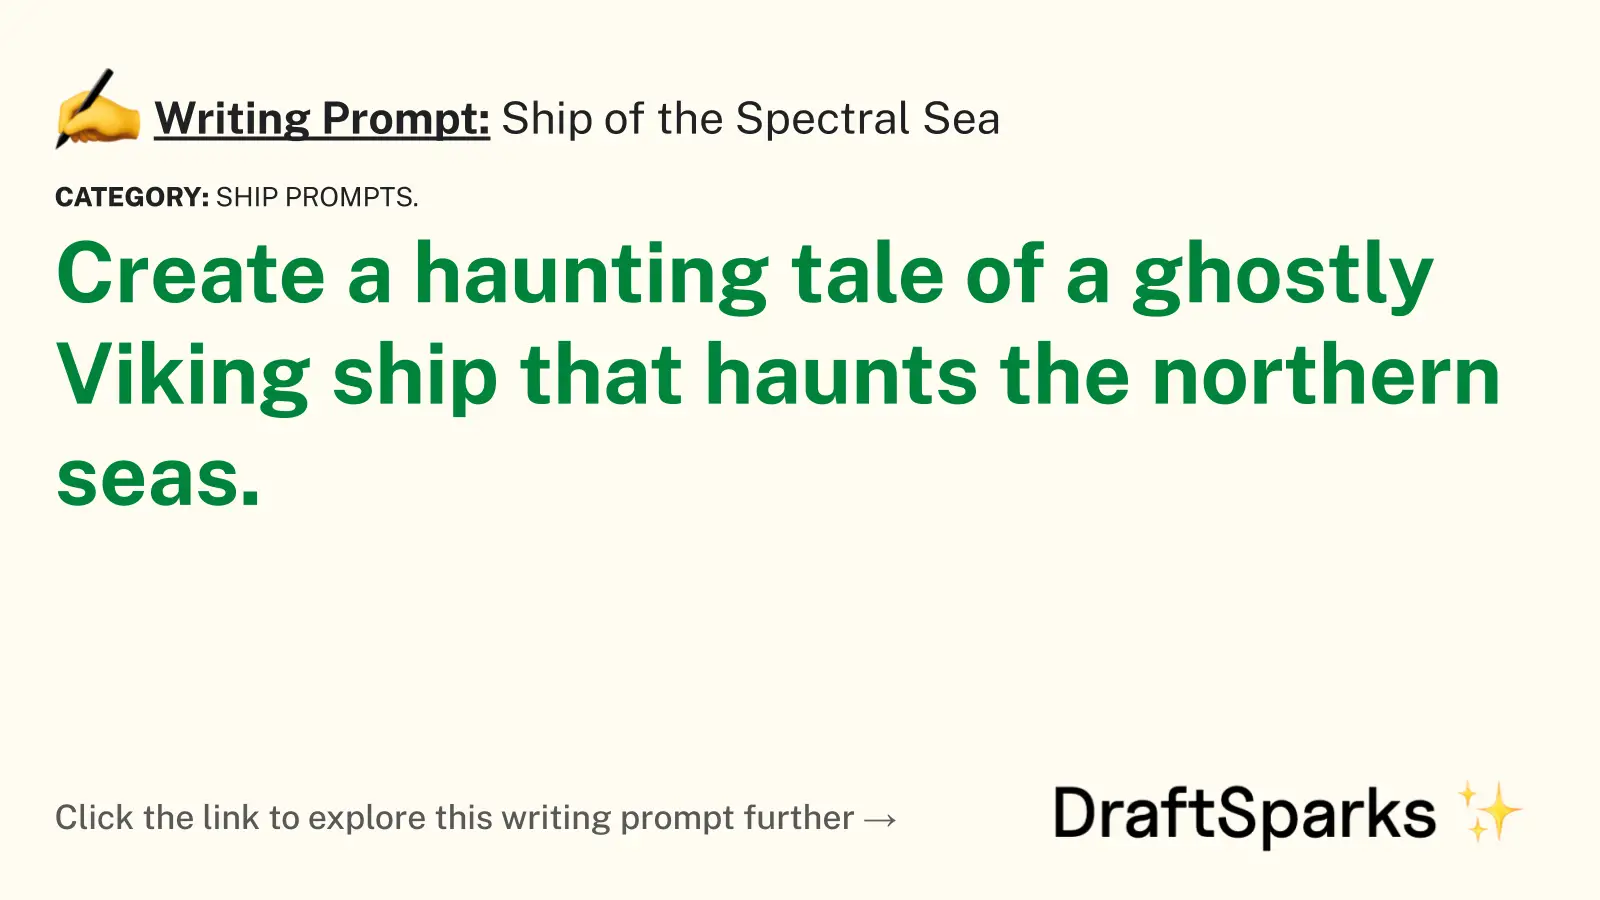 Ship of the Spectral Sea